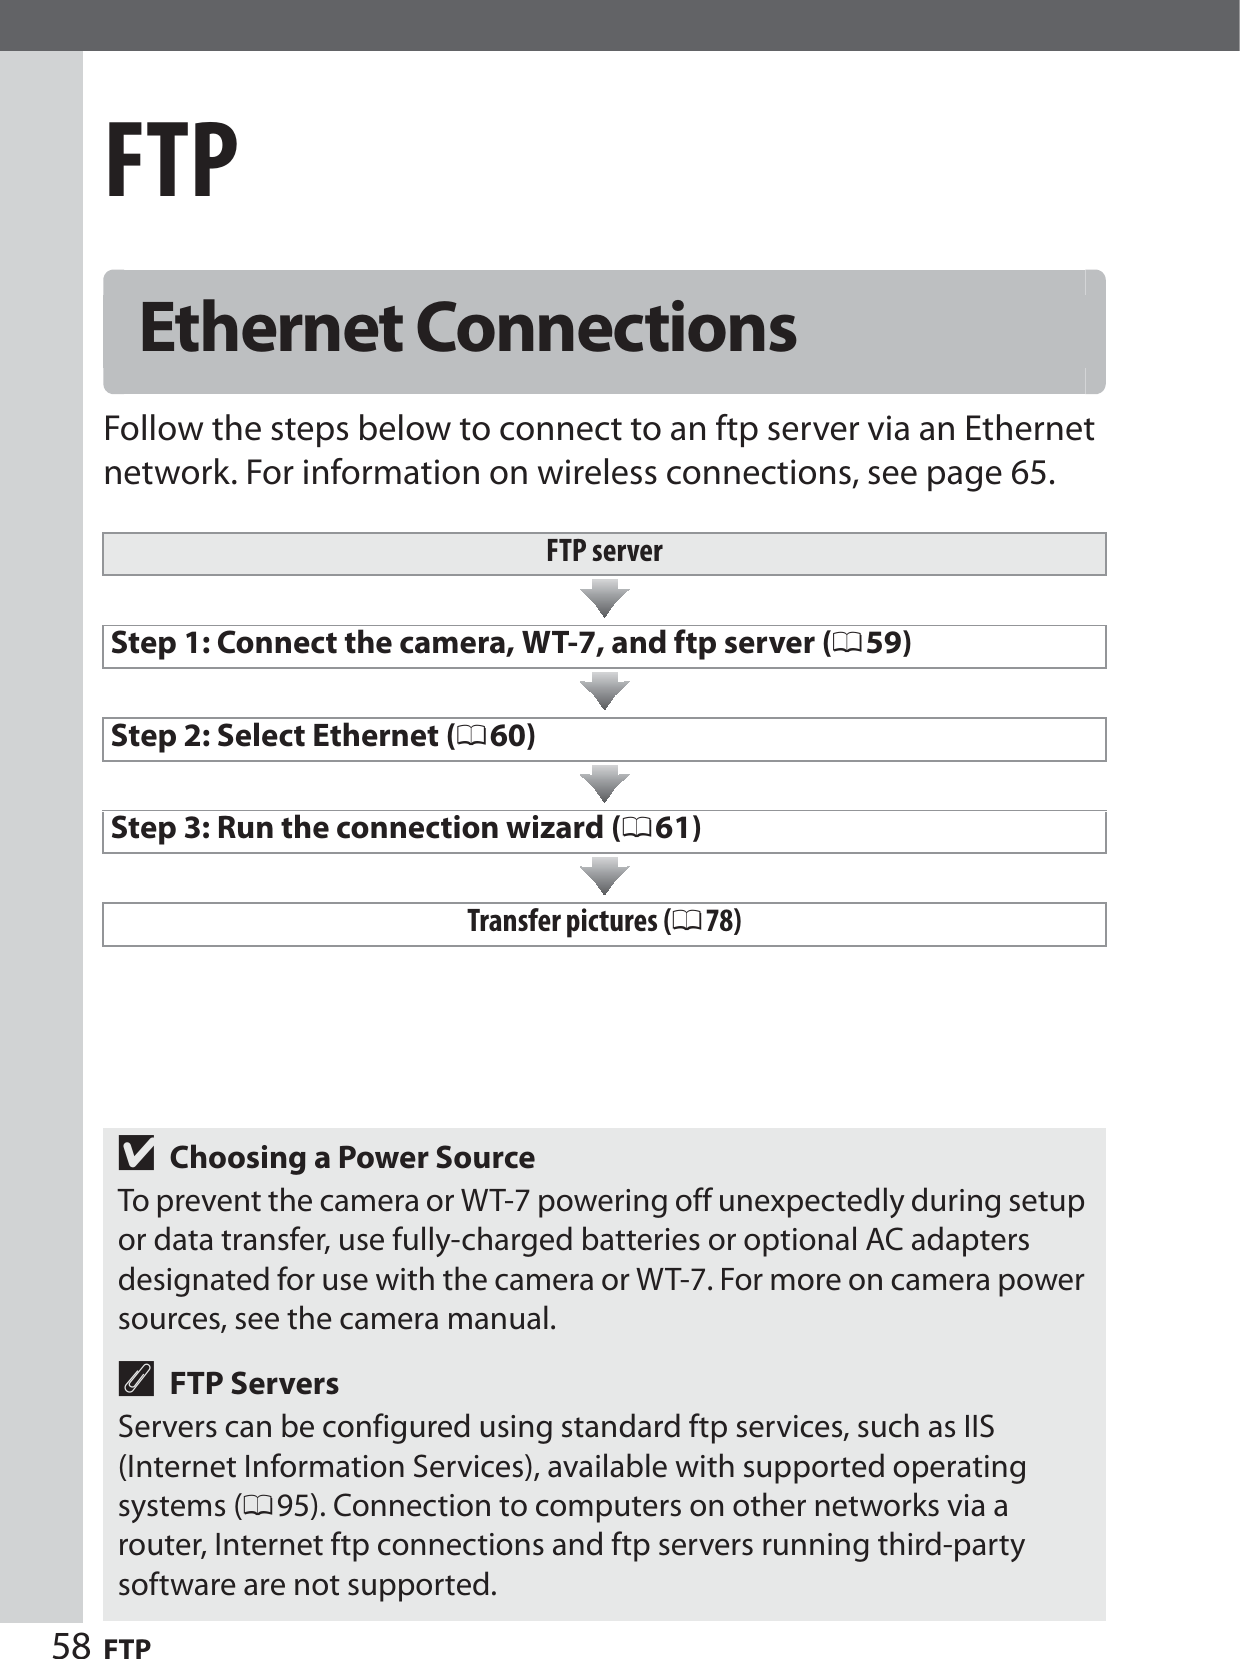 58 FTPFTPFollow the steps below to connect to an ftp server via an Ethernet network. For information on wireless connections, see page 65.Ethernet ConnectionsFTP serverStep 1: Connect the camera, WT-7, and ftp server (059)Step 2: Select Ethernet (060)Step 3: Run the connection wizard (061)Transfer pictures (078)DChoosing a Power SourceTo prevent the camera or WT-7 powering off unexpectedly during setup or data transfer, use fully-charged batteries or optional AC adapters designated for use with the camera or WT-7. For more on camera power sources, see the camera manual.AFTP ServersServers can be configured using standard ftp services, such as IIS (Internet Information Services), available with supported operating systems (095). Connection to computers on other networks via a router, Internet ftp connections and ftp servers running third-party software are not supported.